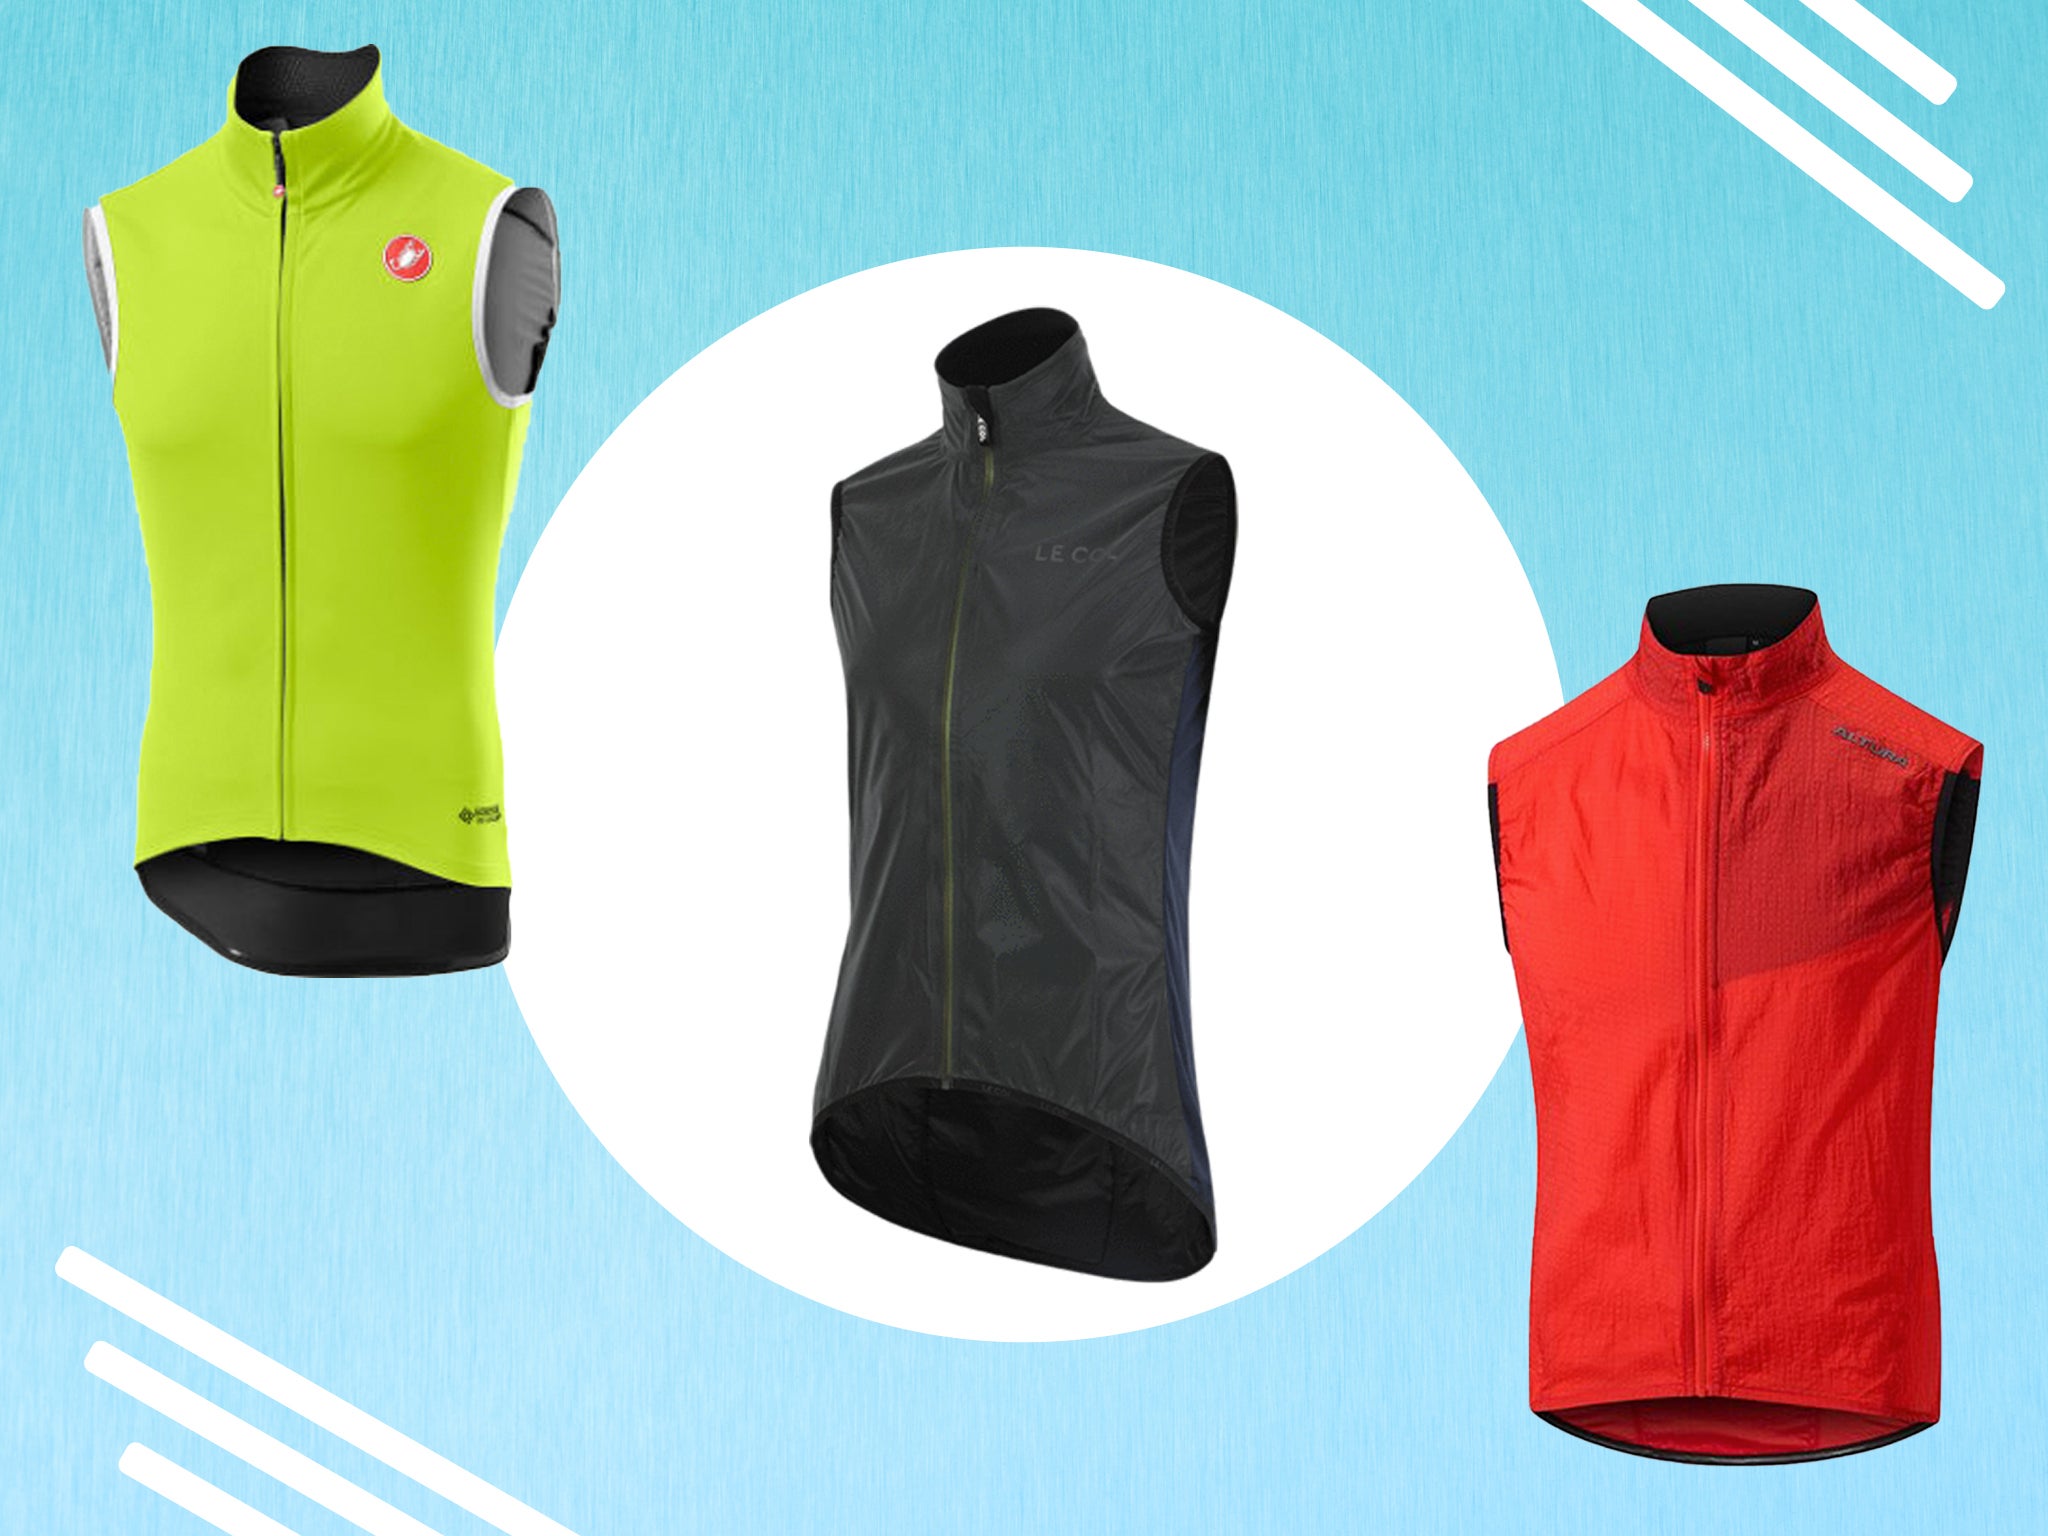 Some offer protection from the rain when it arrives out of the blue on a summer’s day, while others will keep your core warm on winter rides